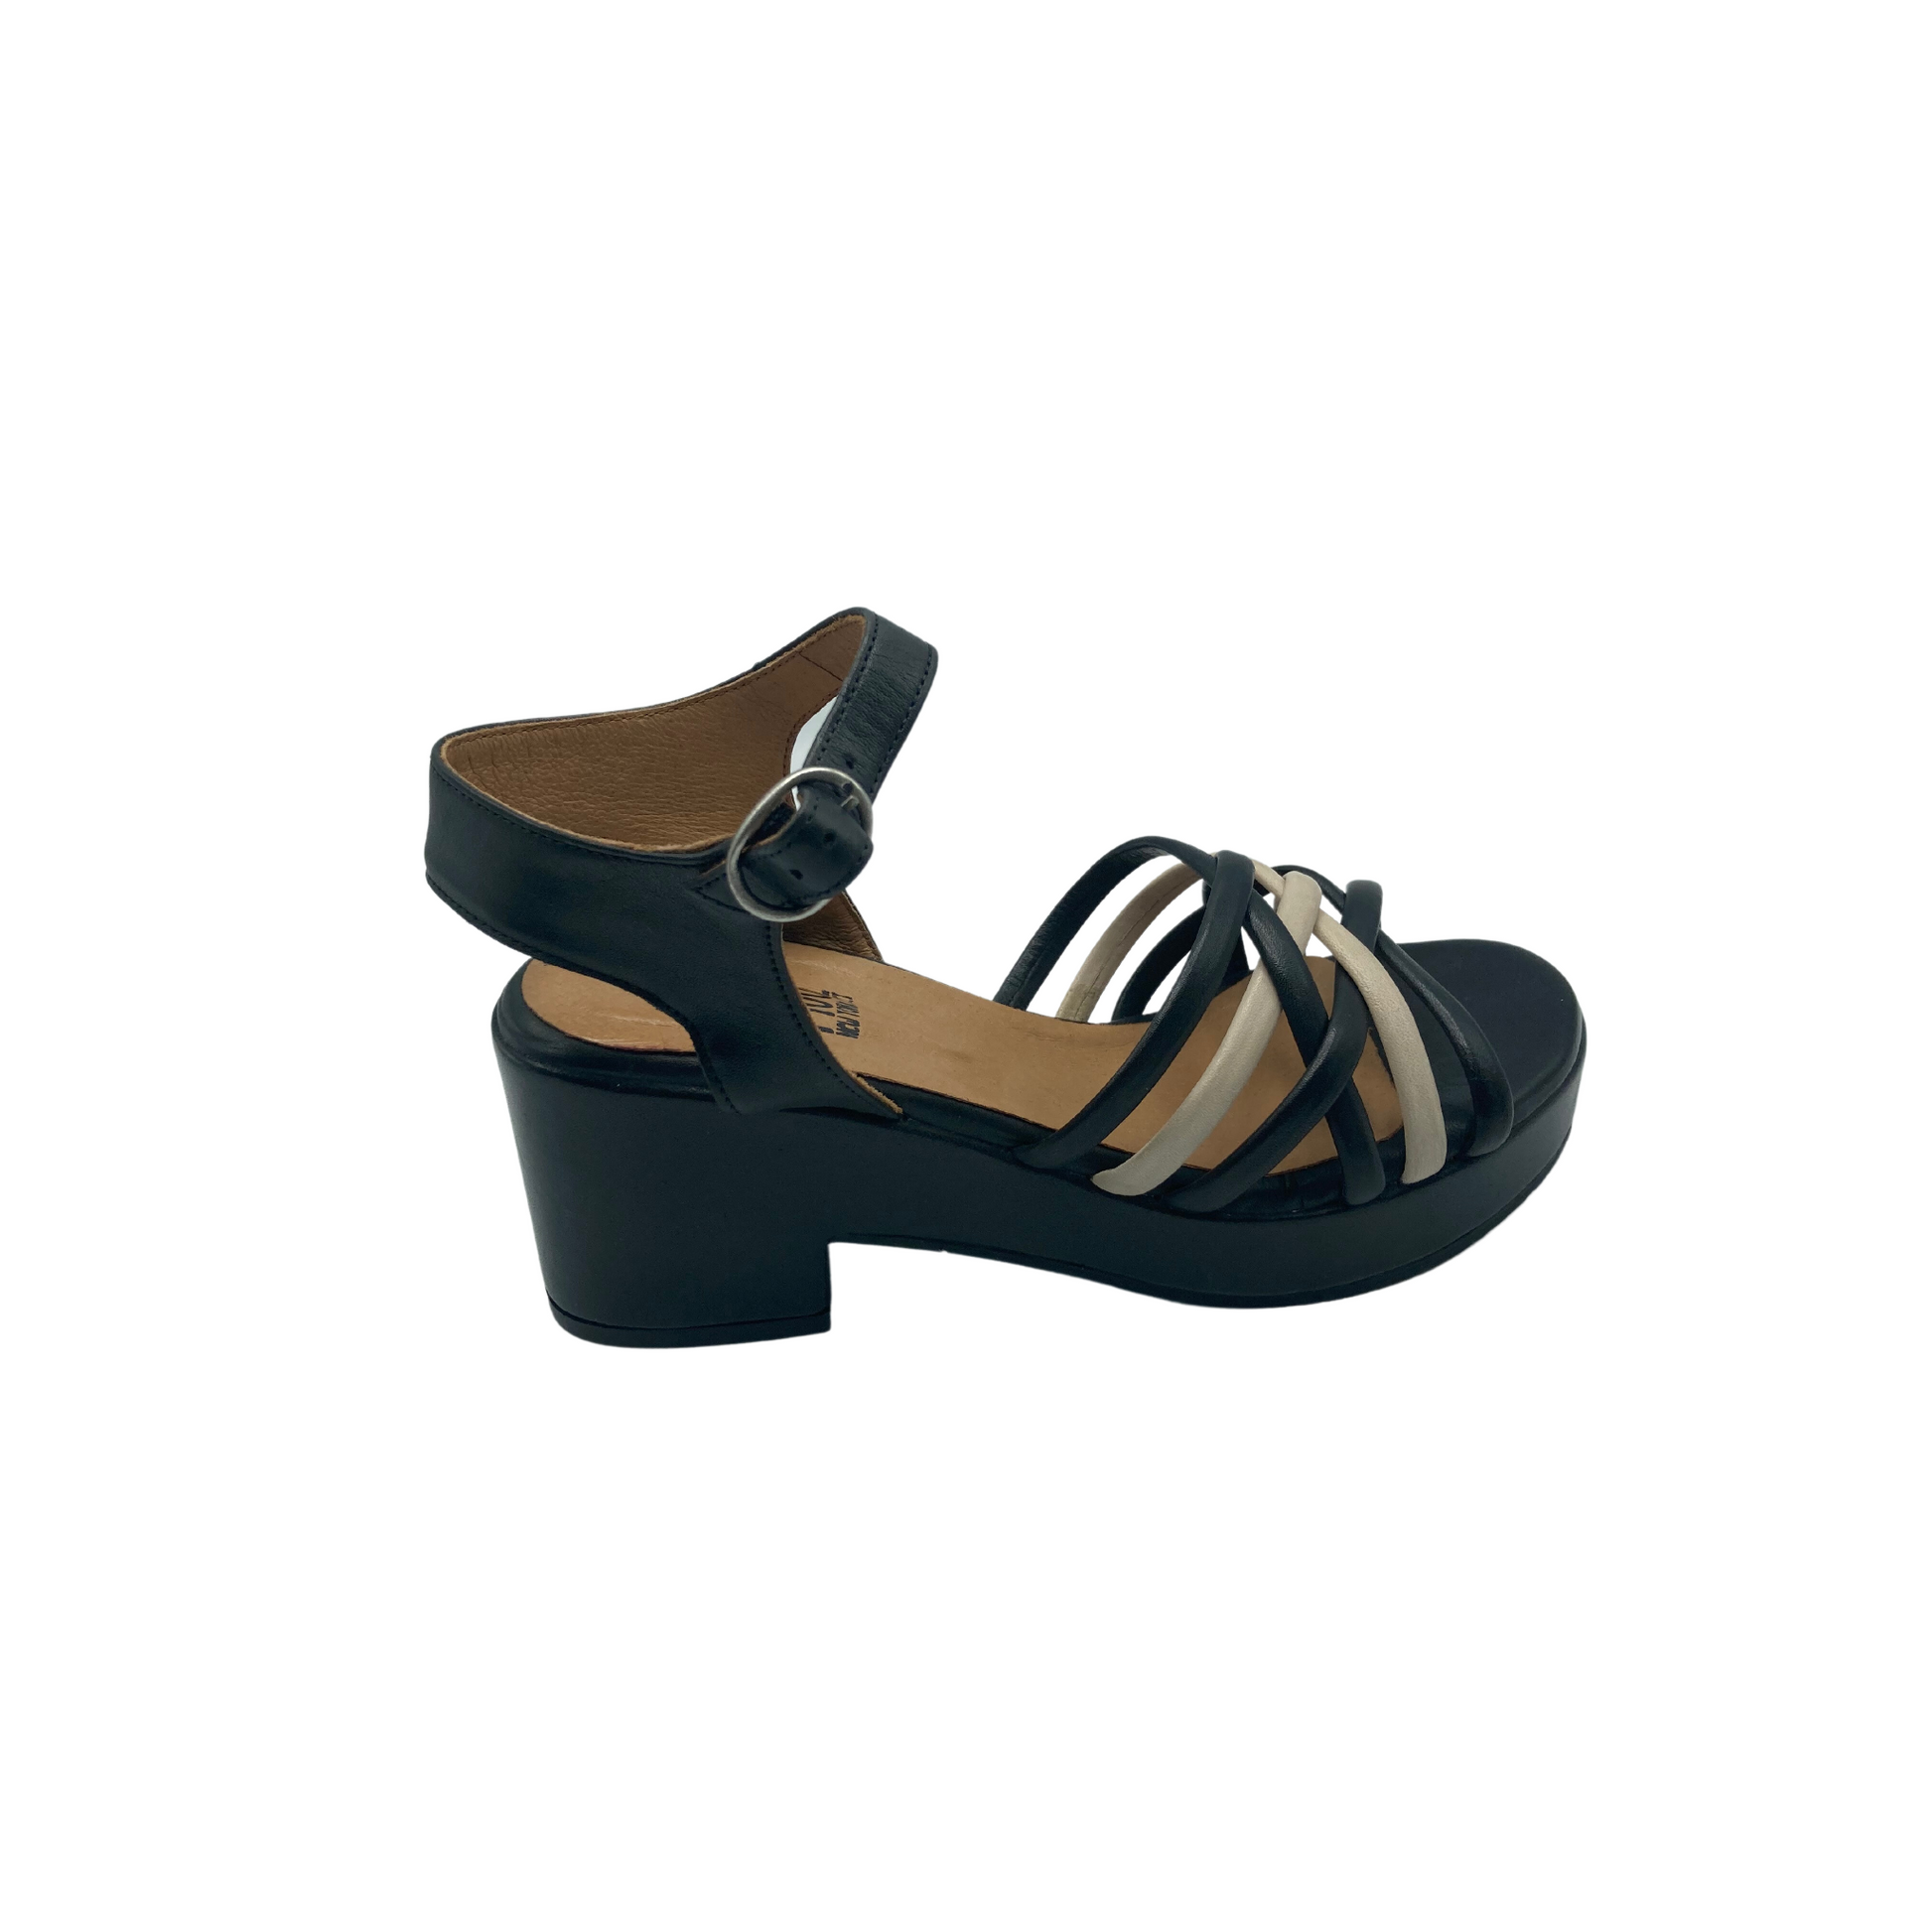 Angled side view of a low platform sandal.  Multiple thin straps criss-cross in front in black and cream.  Open toe and heel.  Wider heel and ankle strap with adjustable buckle.